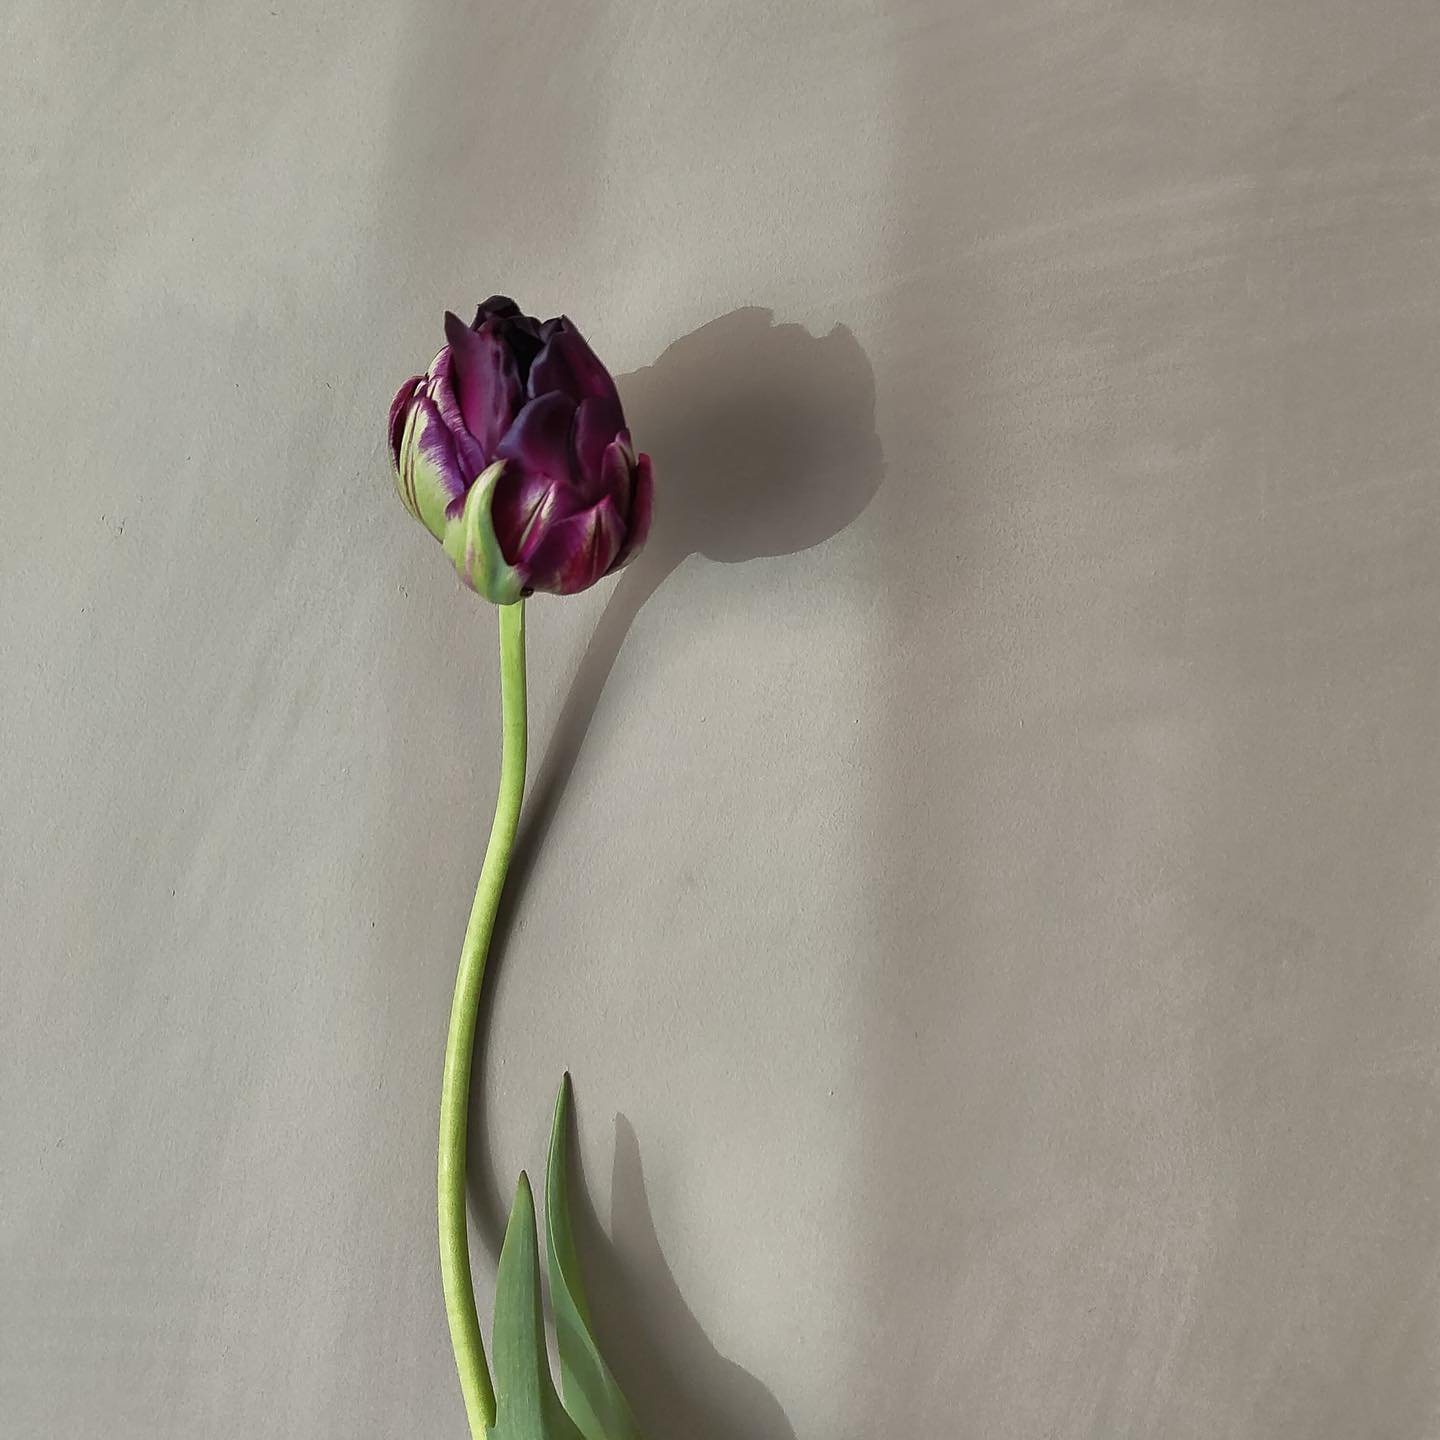 The last of our home grown tulips and we are still amazed by how beautiful they are (we might of taken the last ones for ourselves) 

#spring #tulips #growlocal #springflowers #sheffield #florist #bulbs #springflowers #local #shoplocal #shopsmall